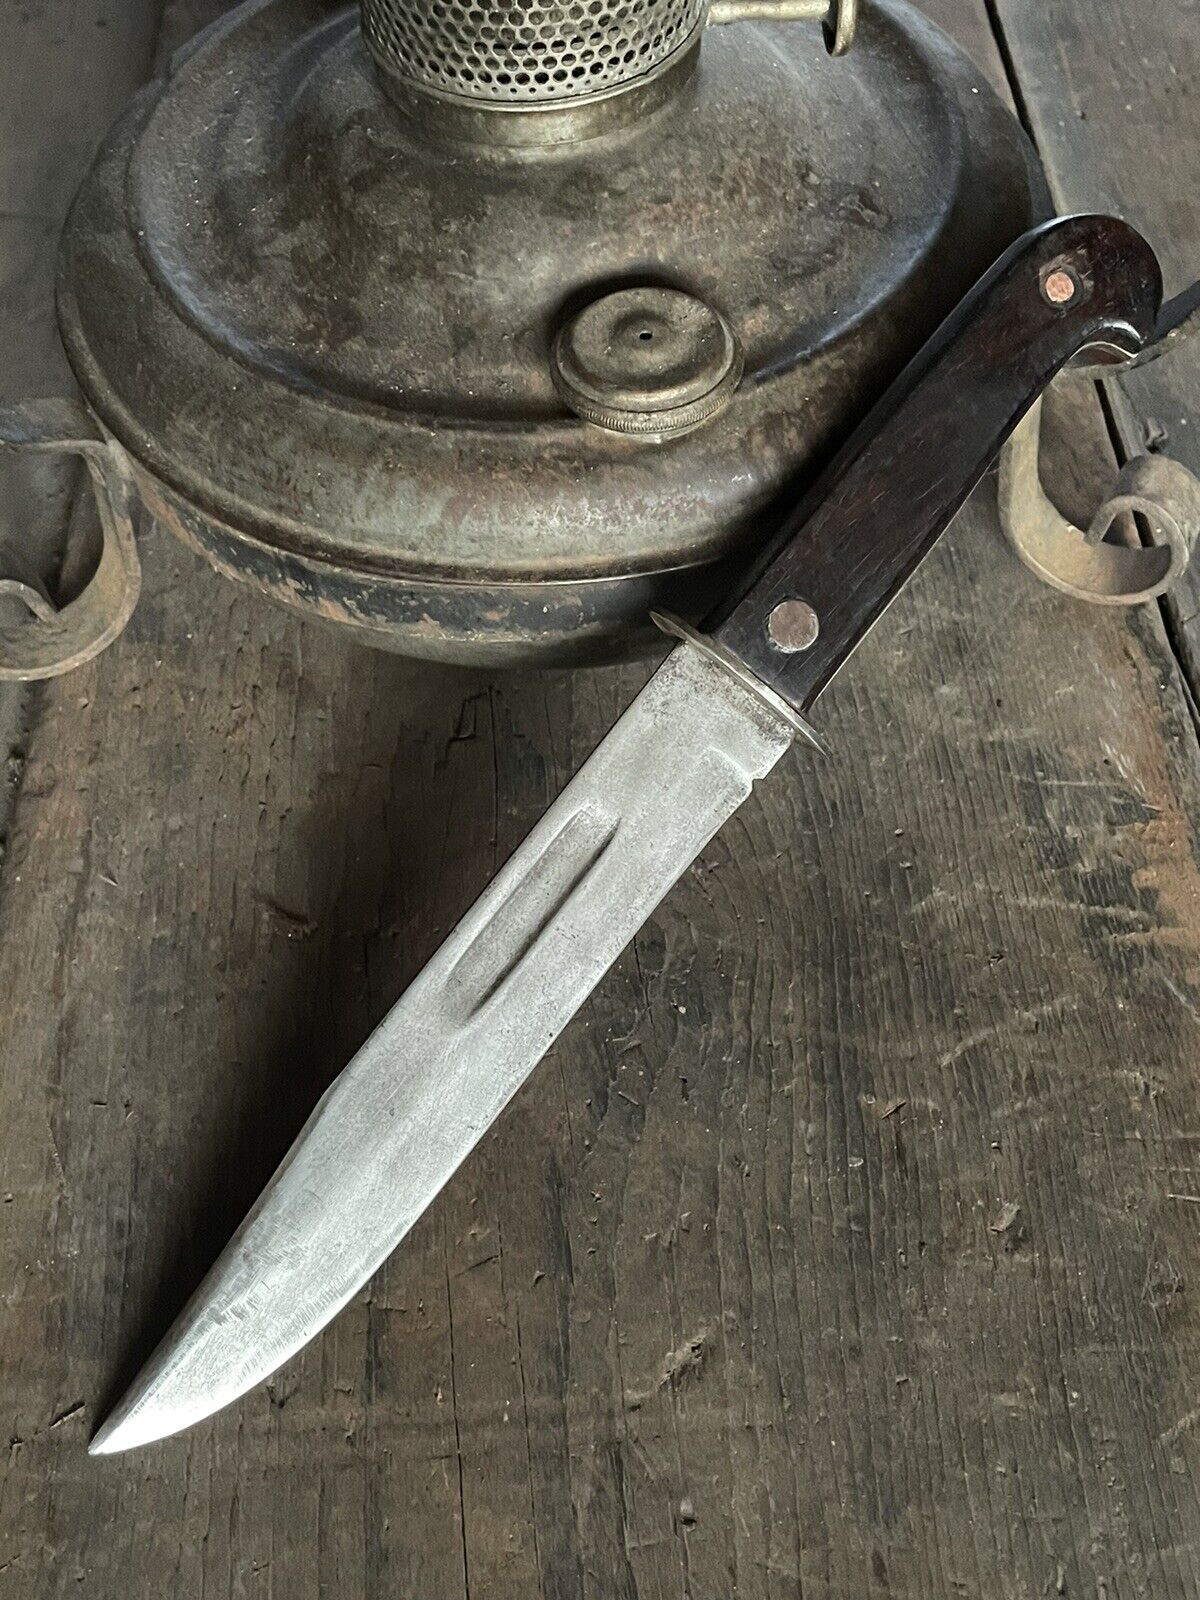 Ww2 Royal Brand Bowie Knife and scabbard